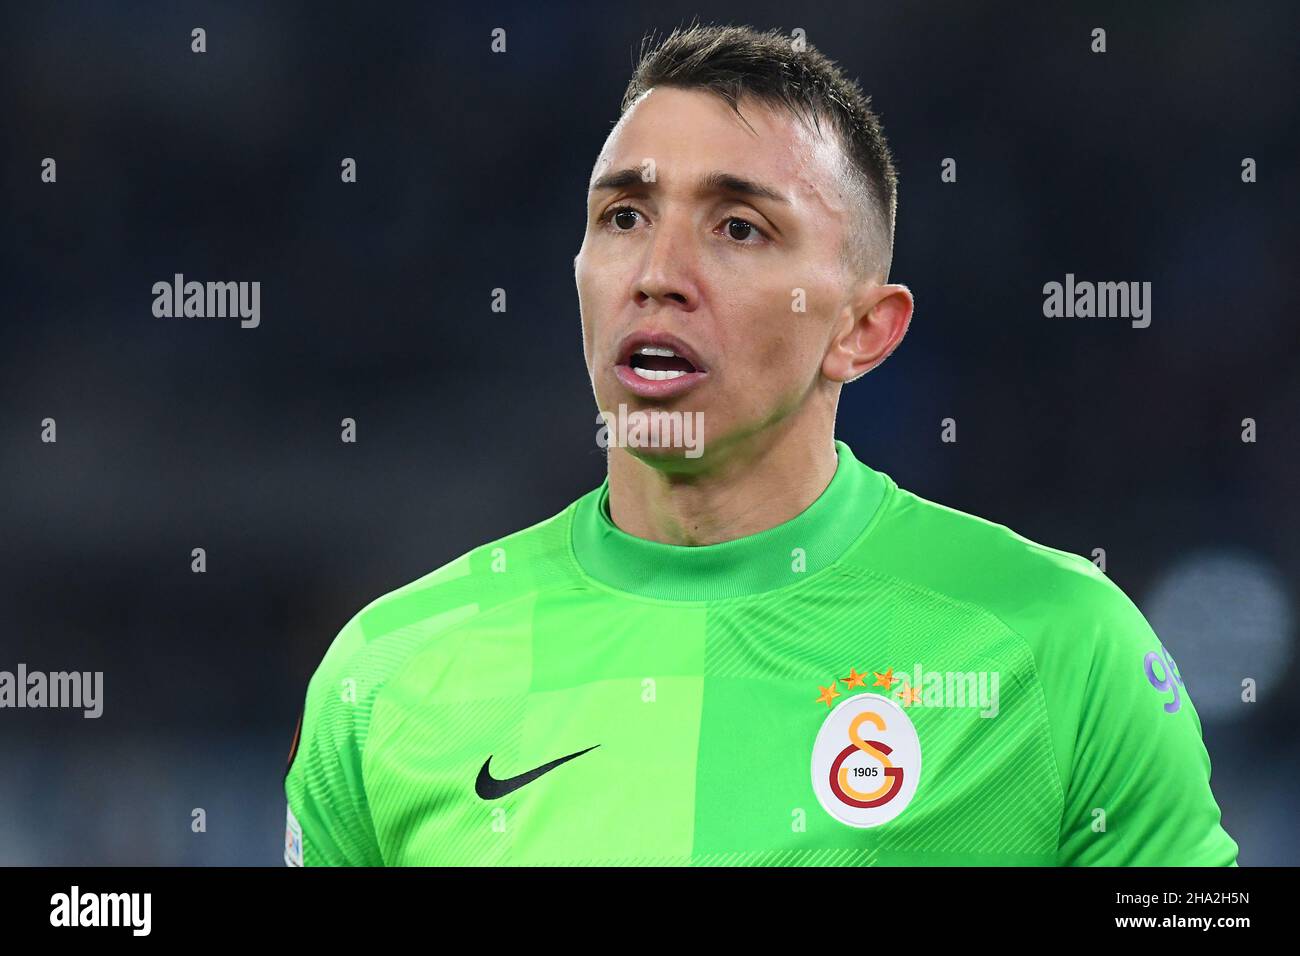 Rome, Lazio. 09th Dec, 2021. Fernando Muslera of Galatasaray during the  Europa League match between SS Lazio v Galatasaray at Olimpico stadium in  Rome, Italy, December 09th, 2021. Fotografo01 Credit: Independent Photo